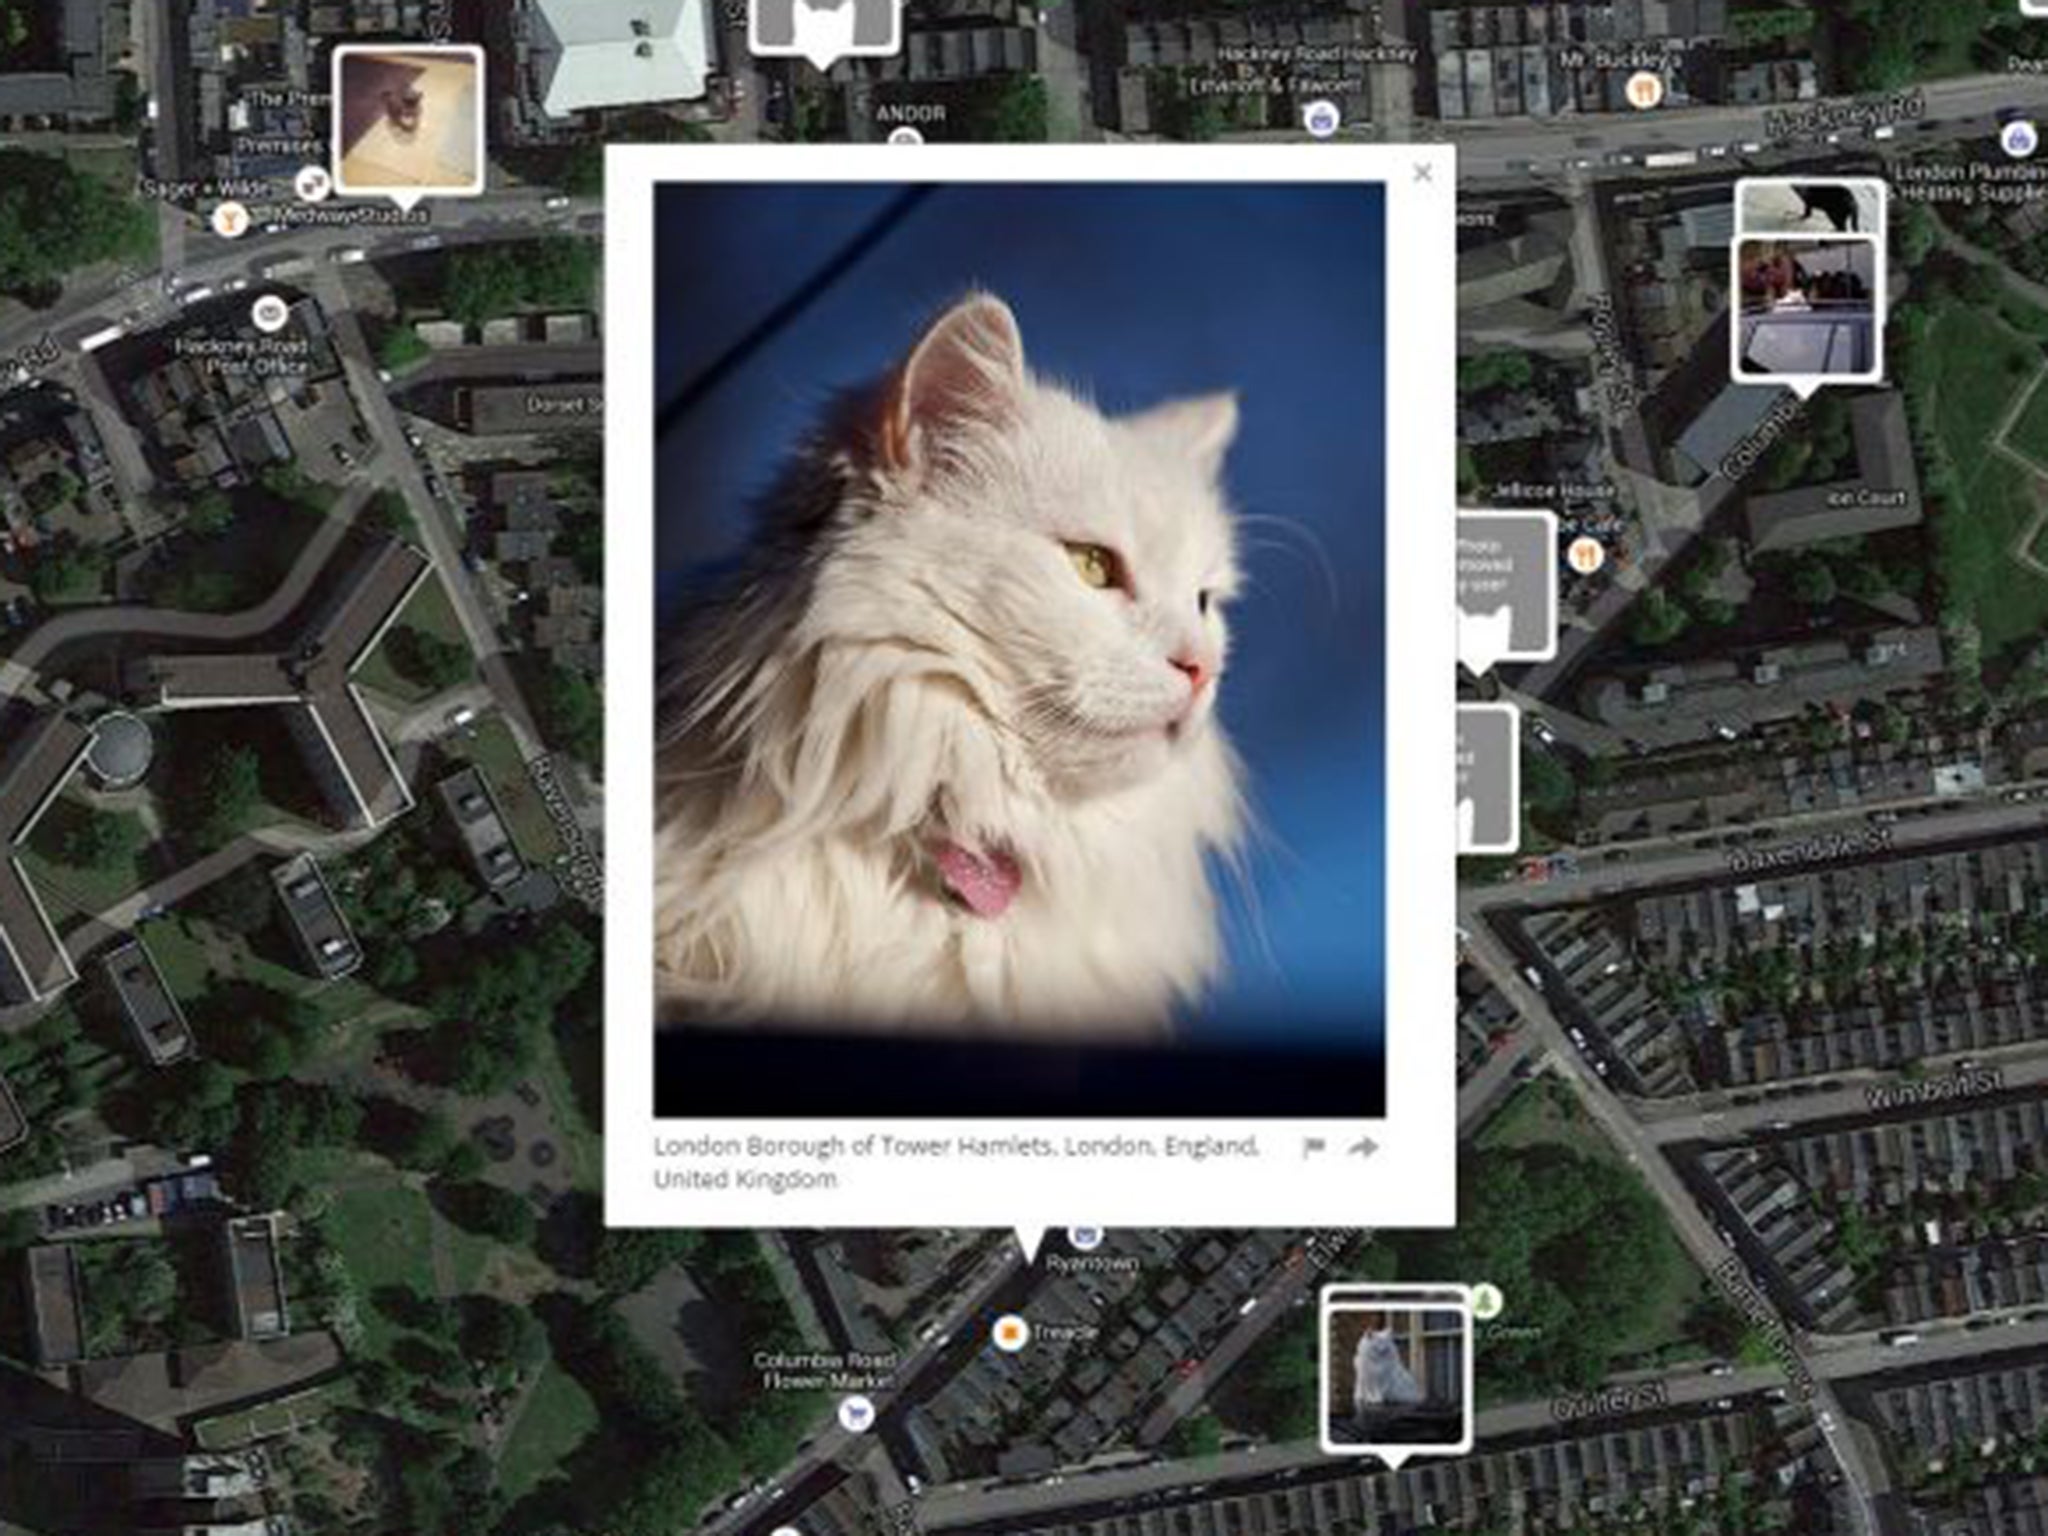 'I Know Where Your Cat Lives' maps pictures of cats posted on social media by their owners